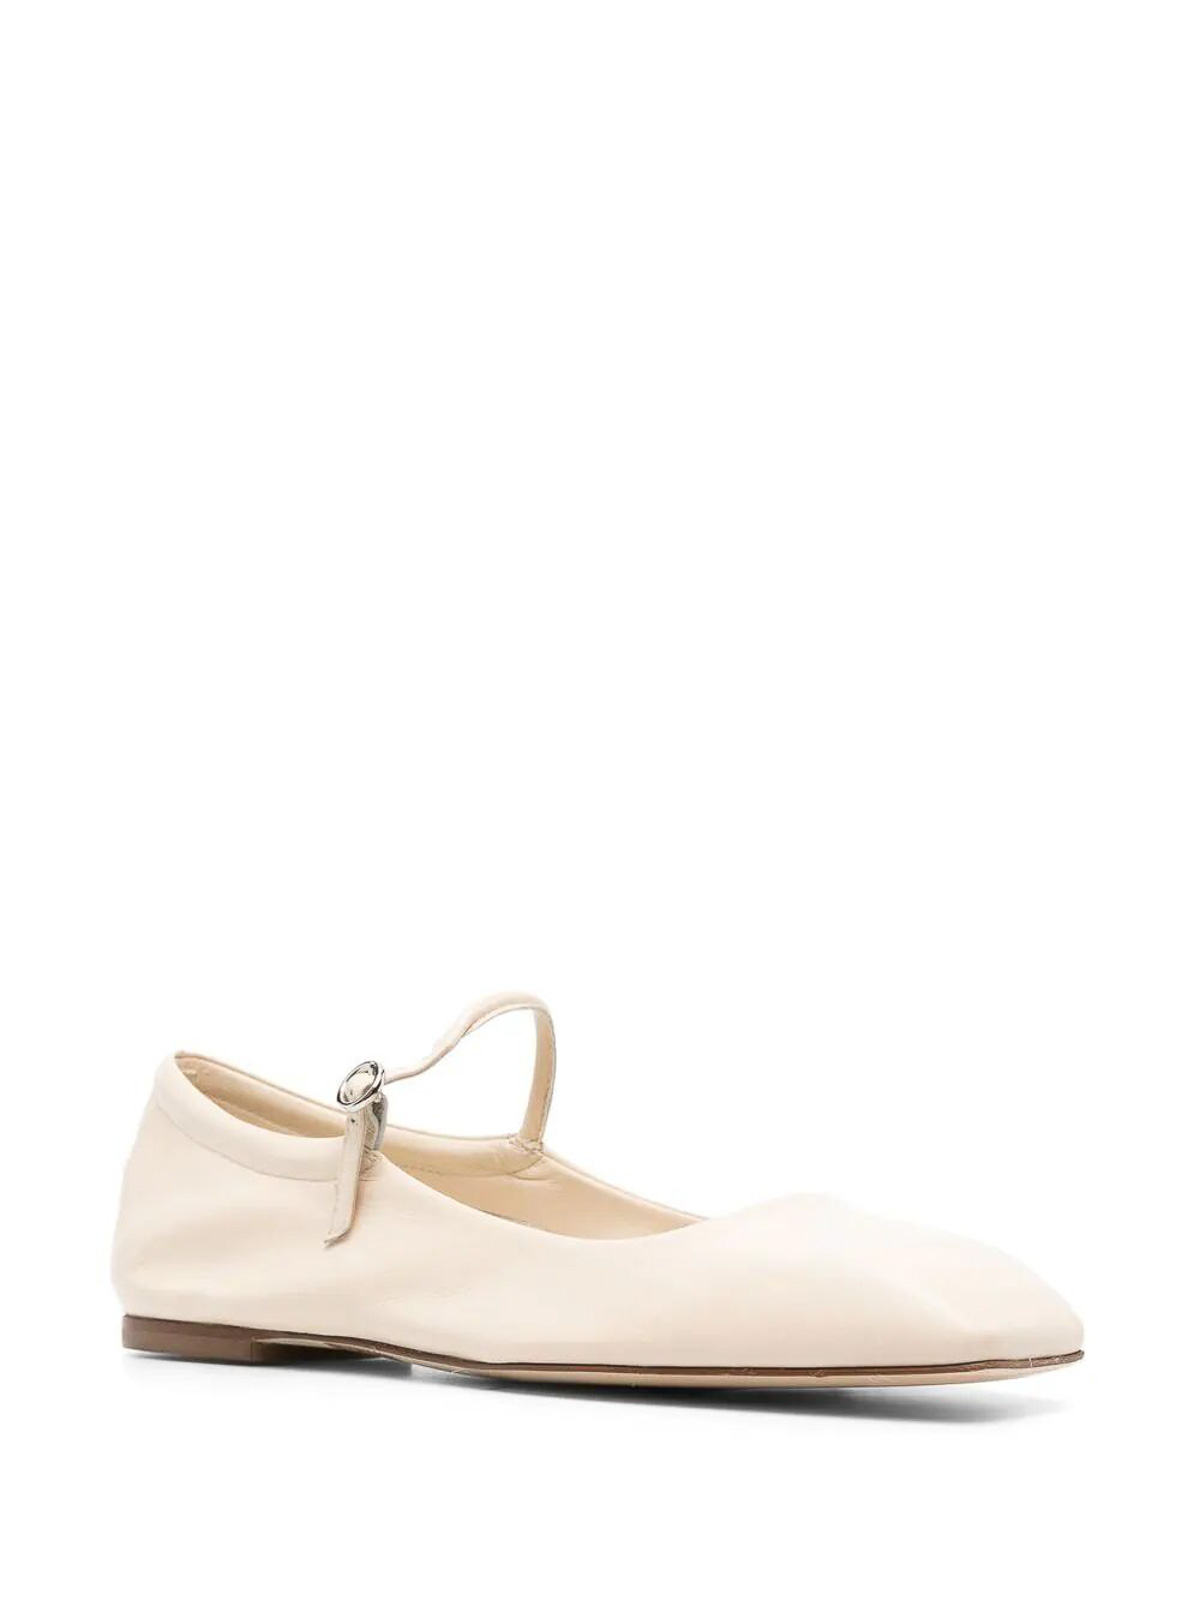 Shop Aeyde Uma Flat Shoes In Nude & Neutrals